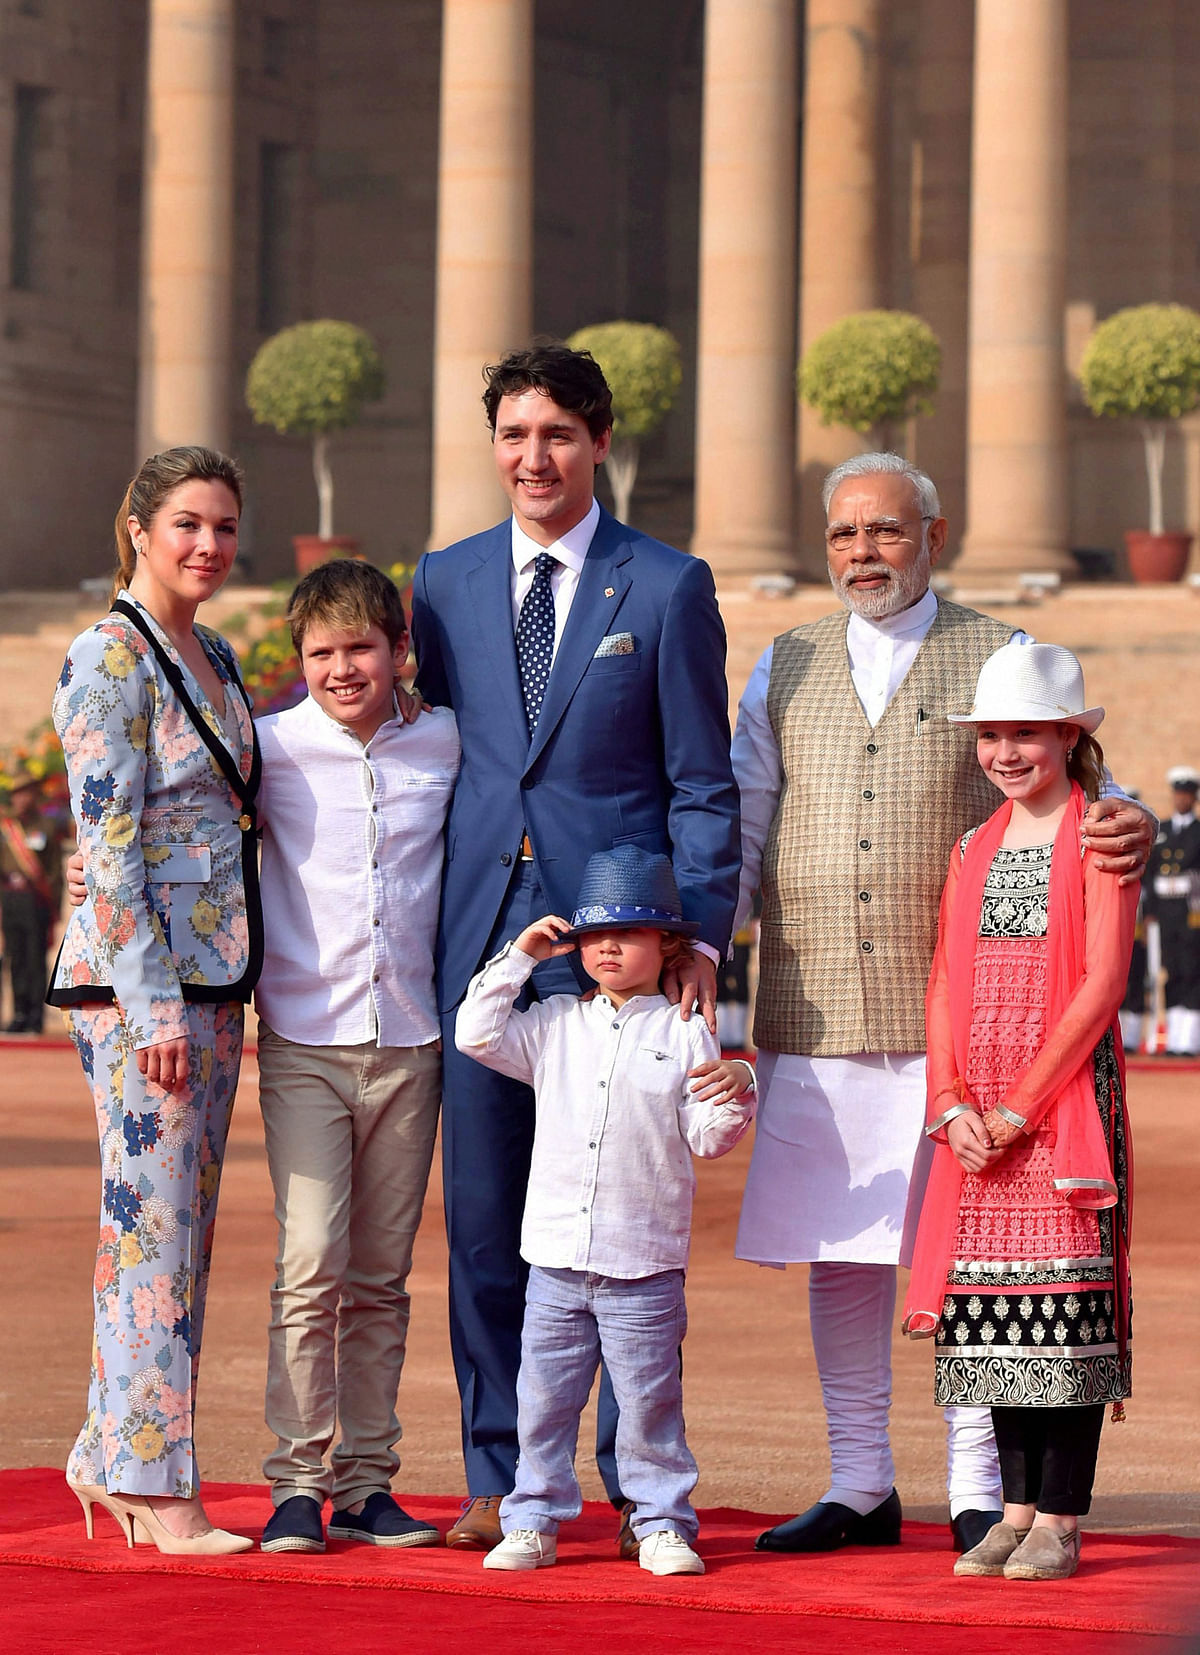 Trudeau described India as a natural partner for commercial cooperation.